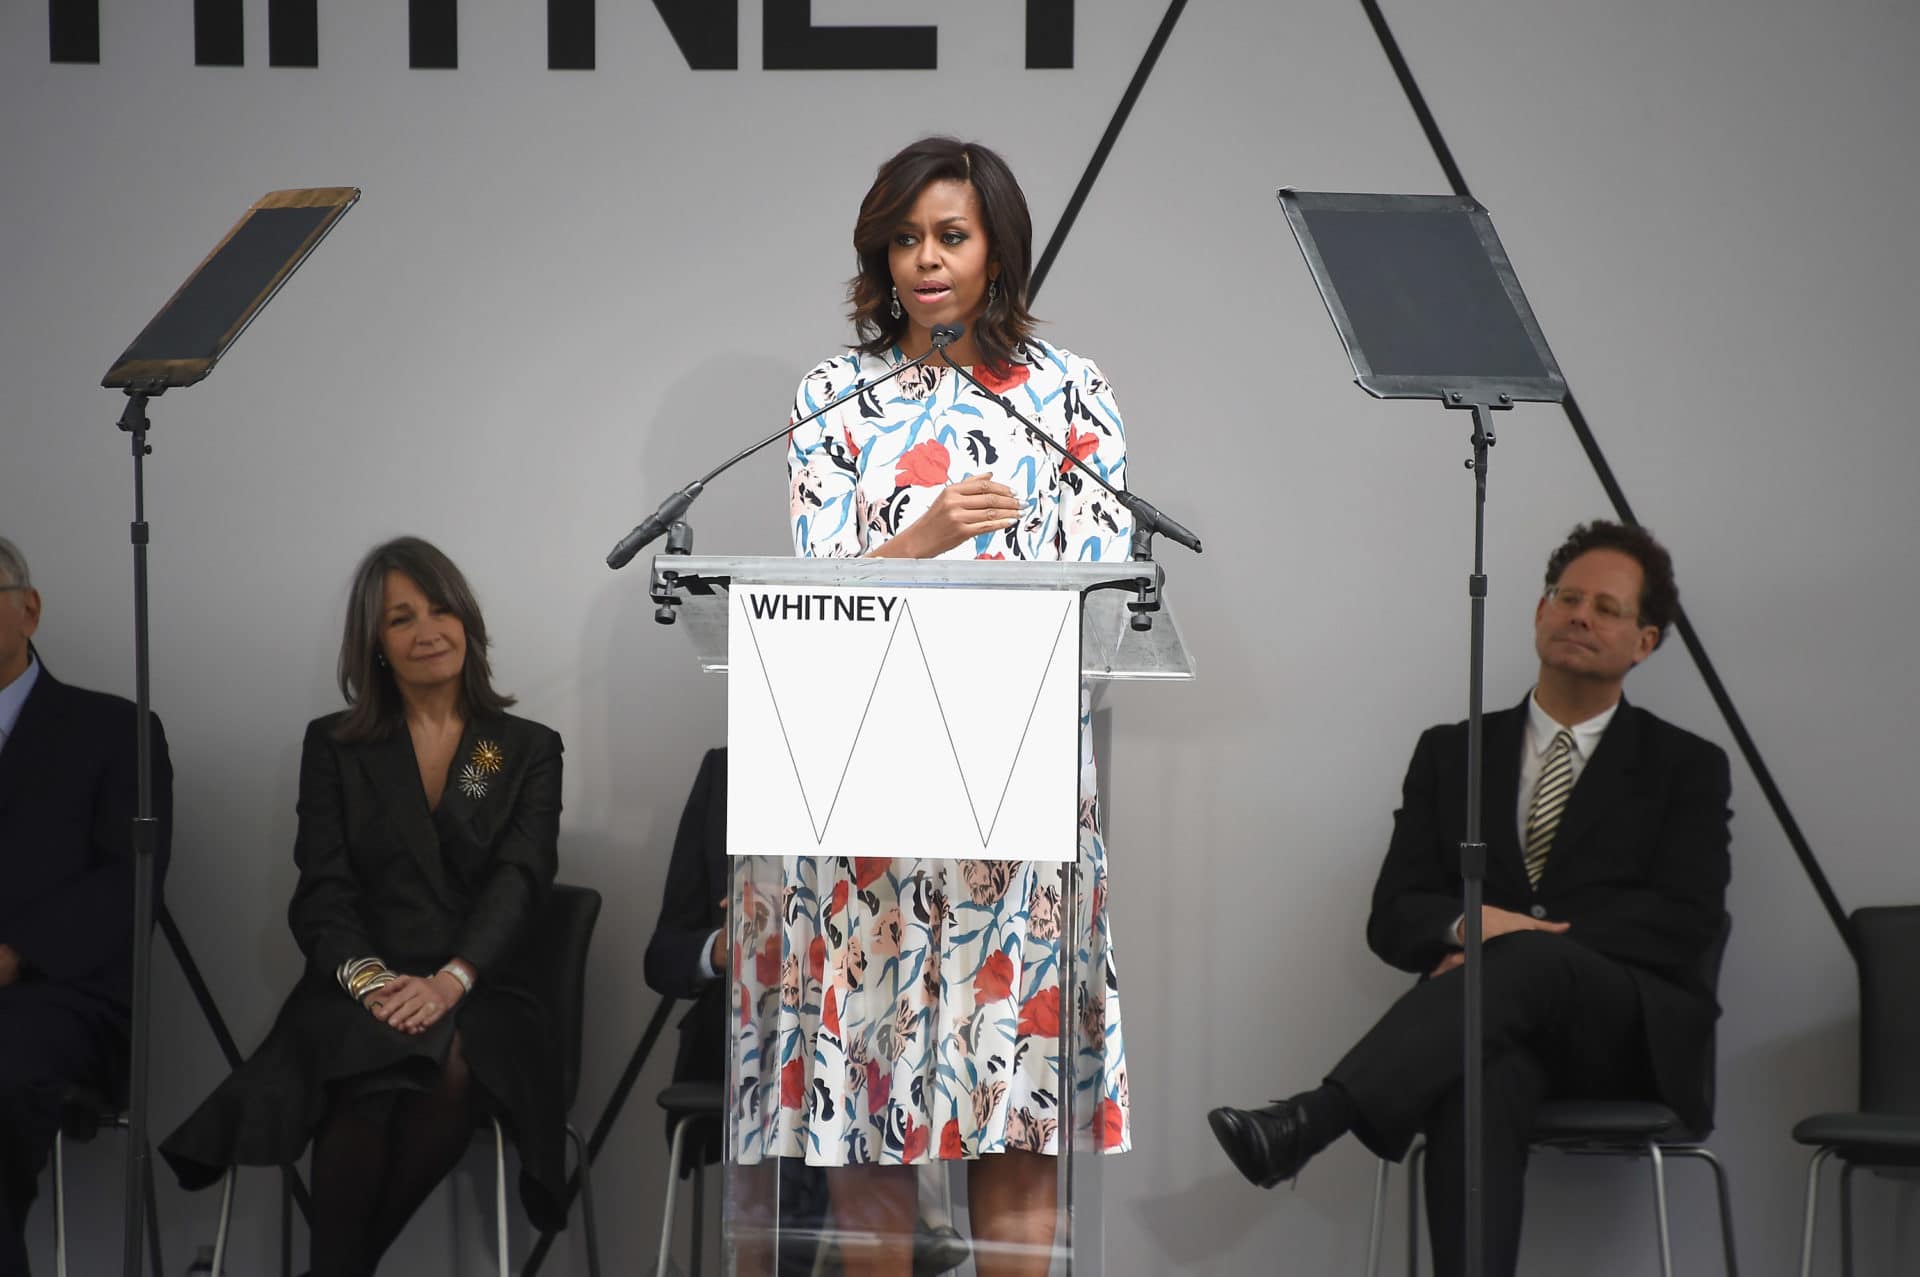 'Becoming' A Style Icon: 21 Times Michelle Obama’s Fashion Sense Was A Whole Mood